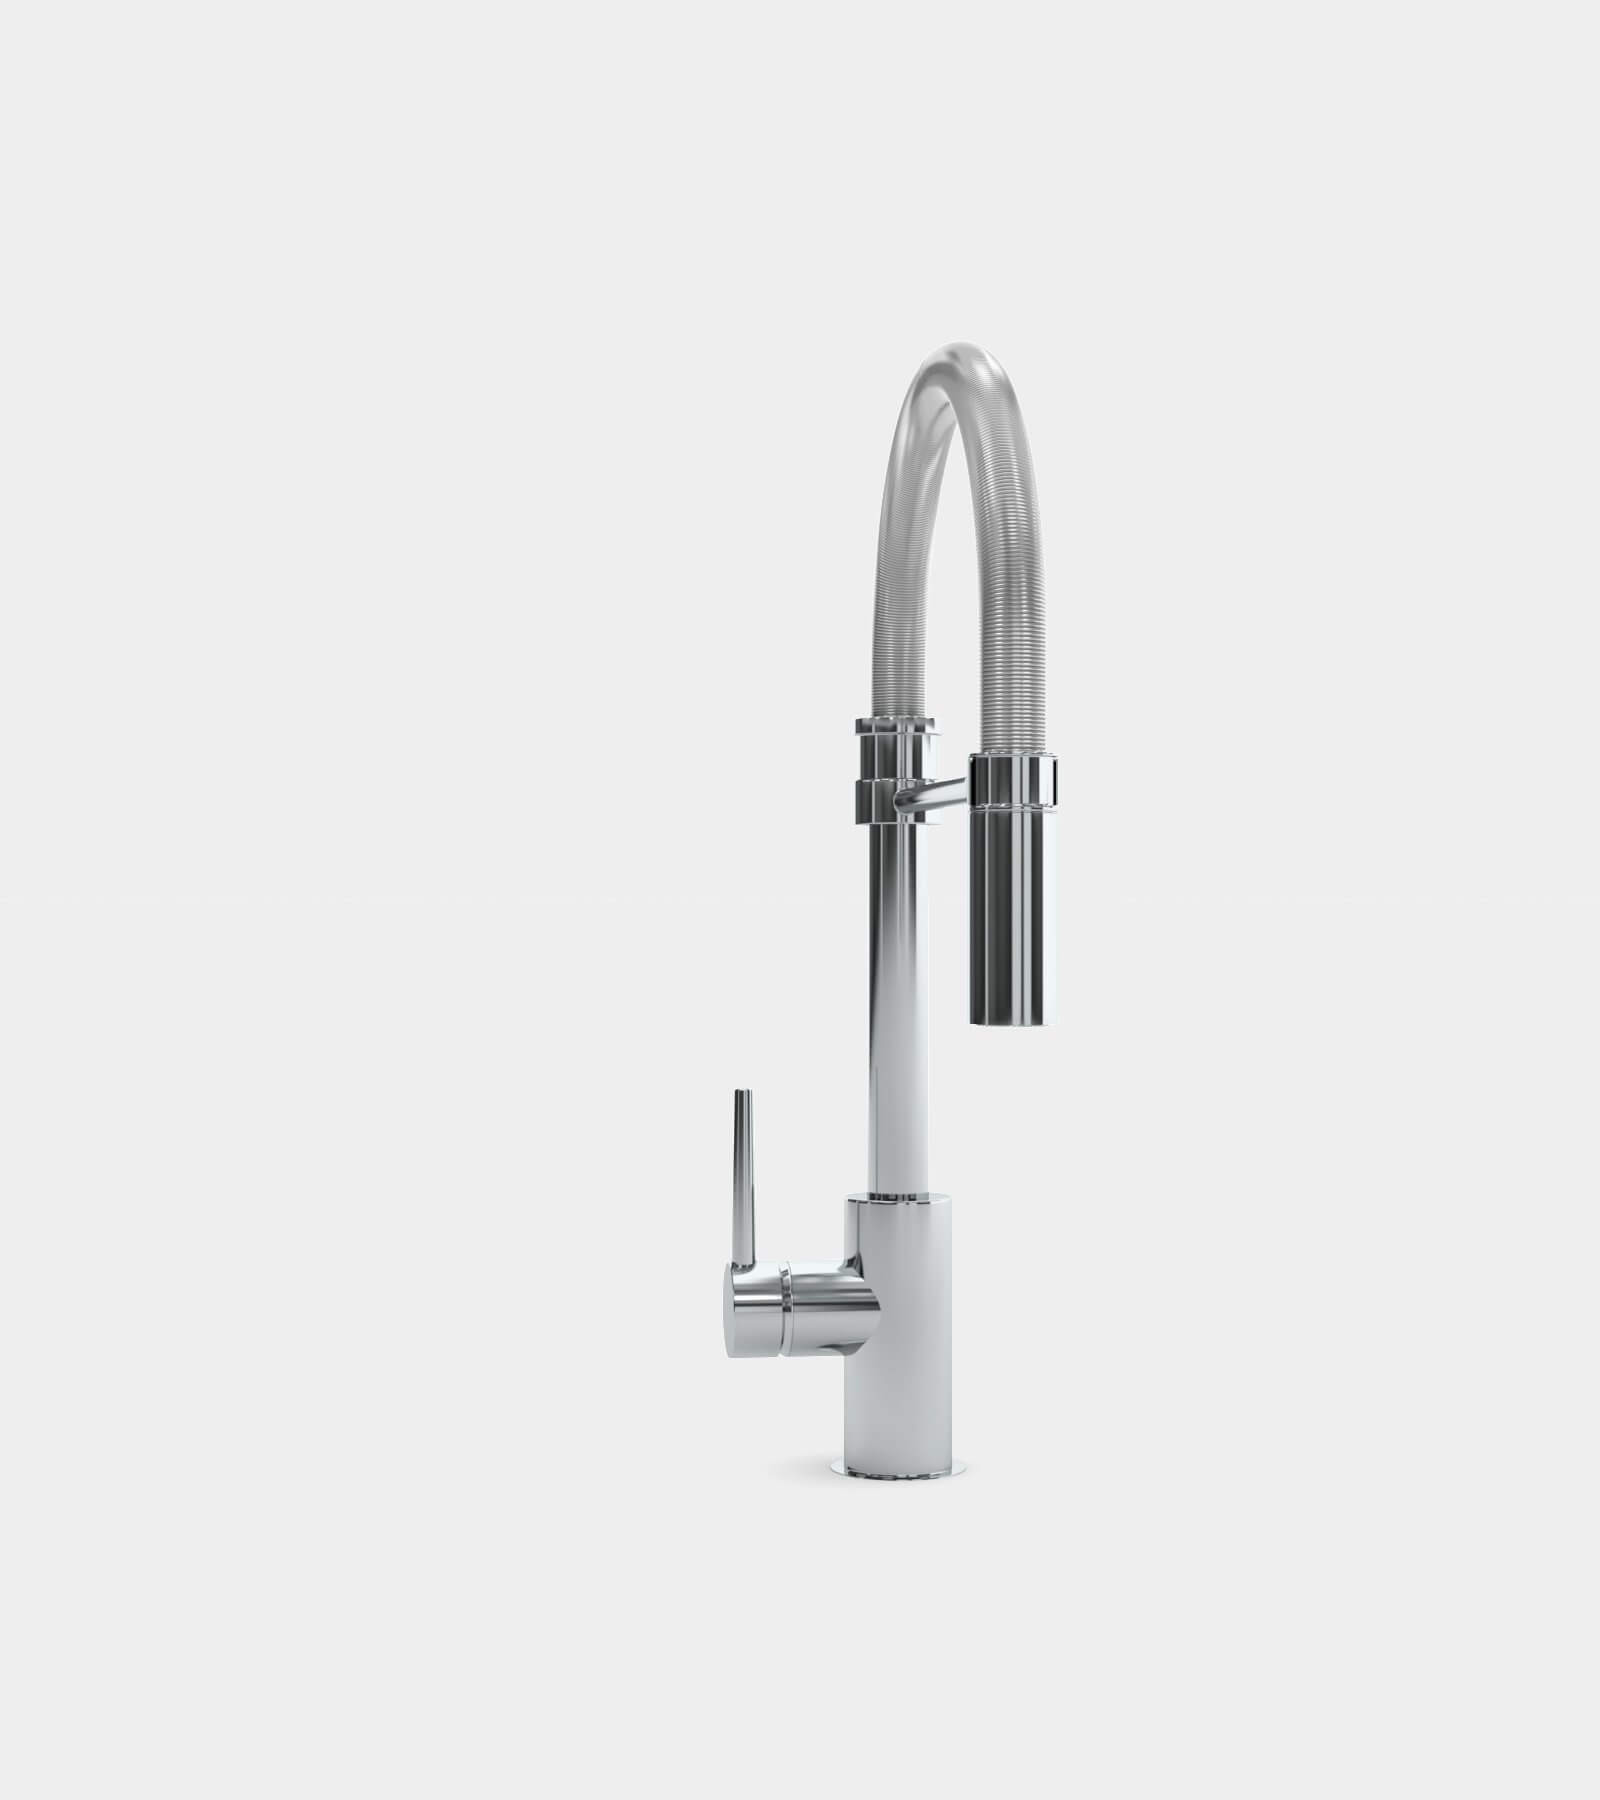 Single handle pull-down faucet for kitchen - 3D Model